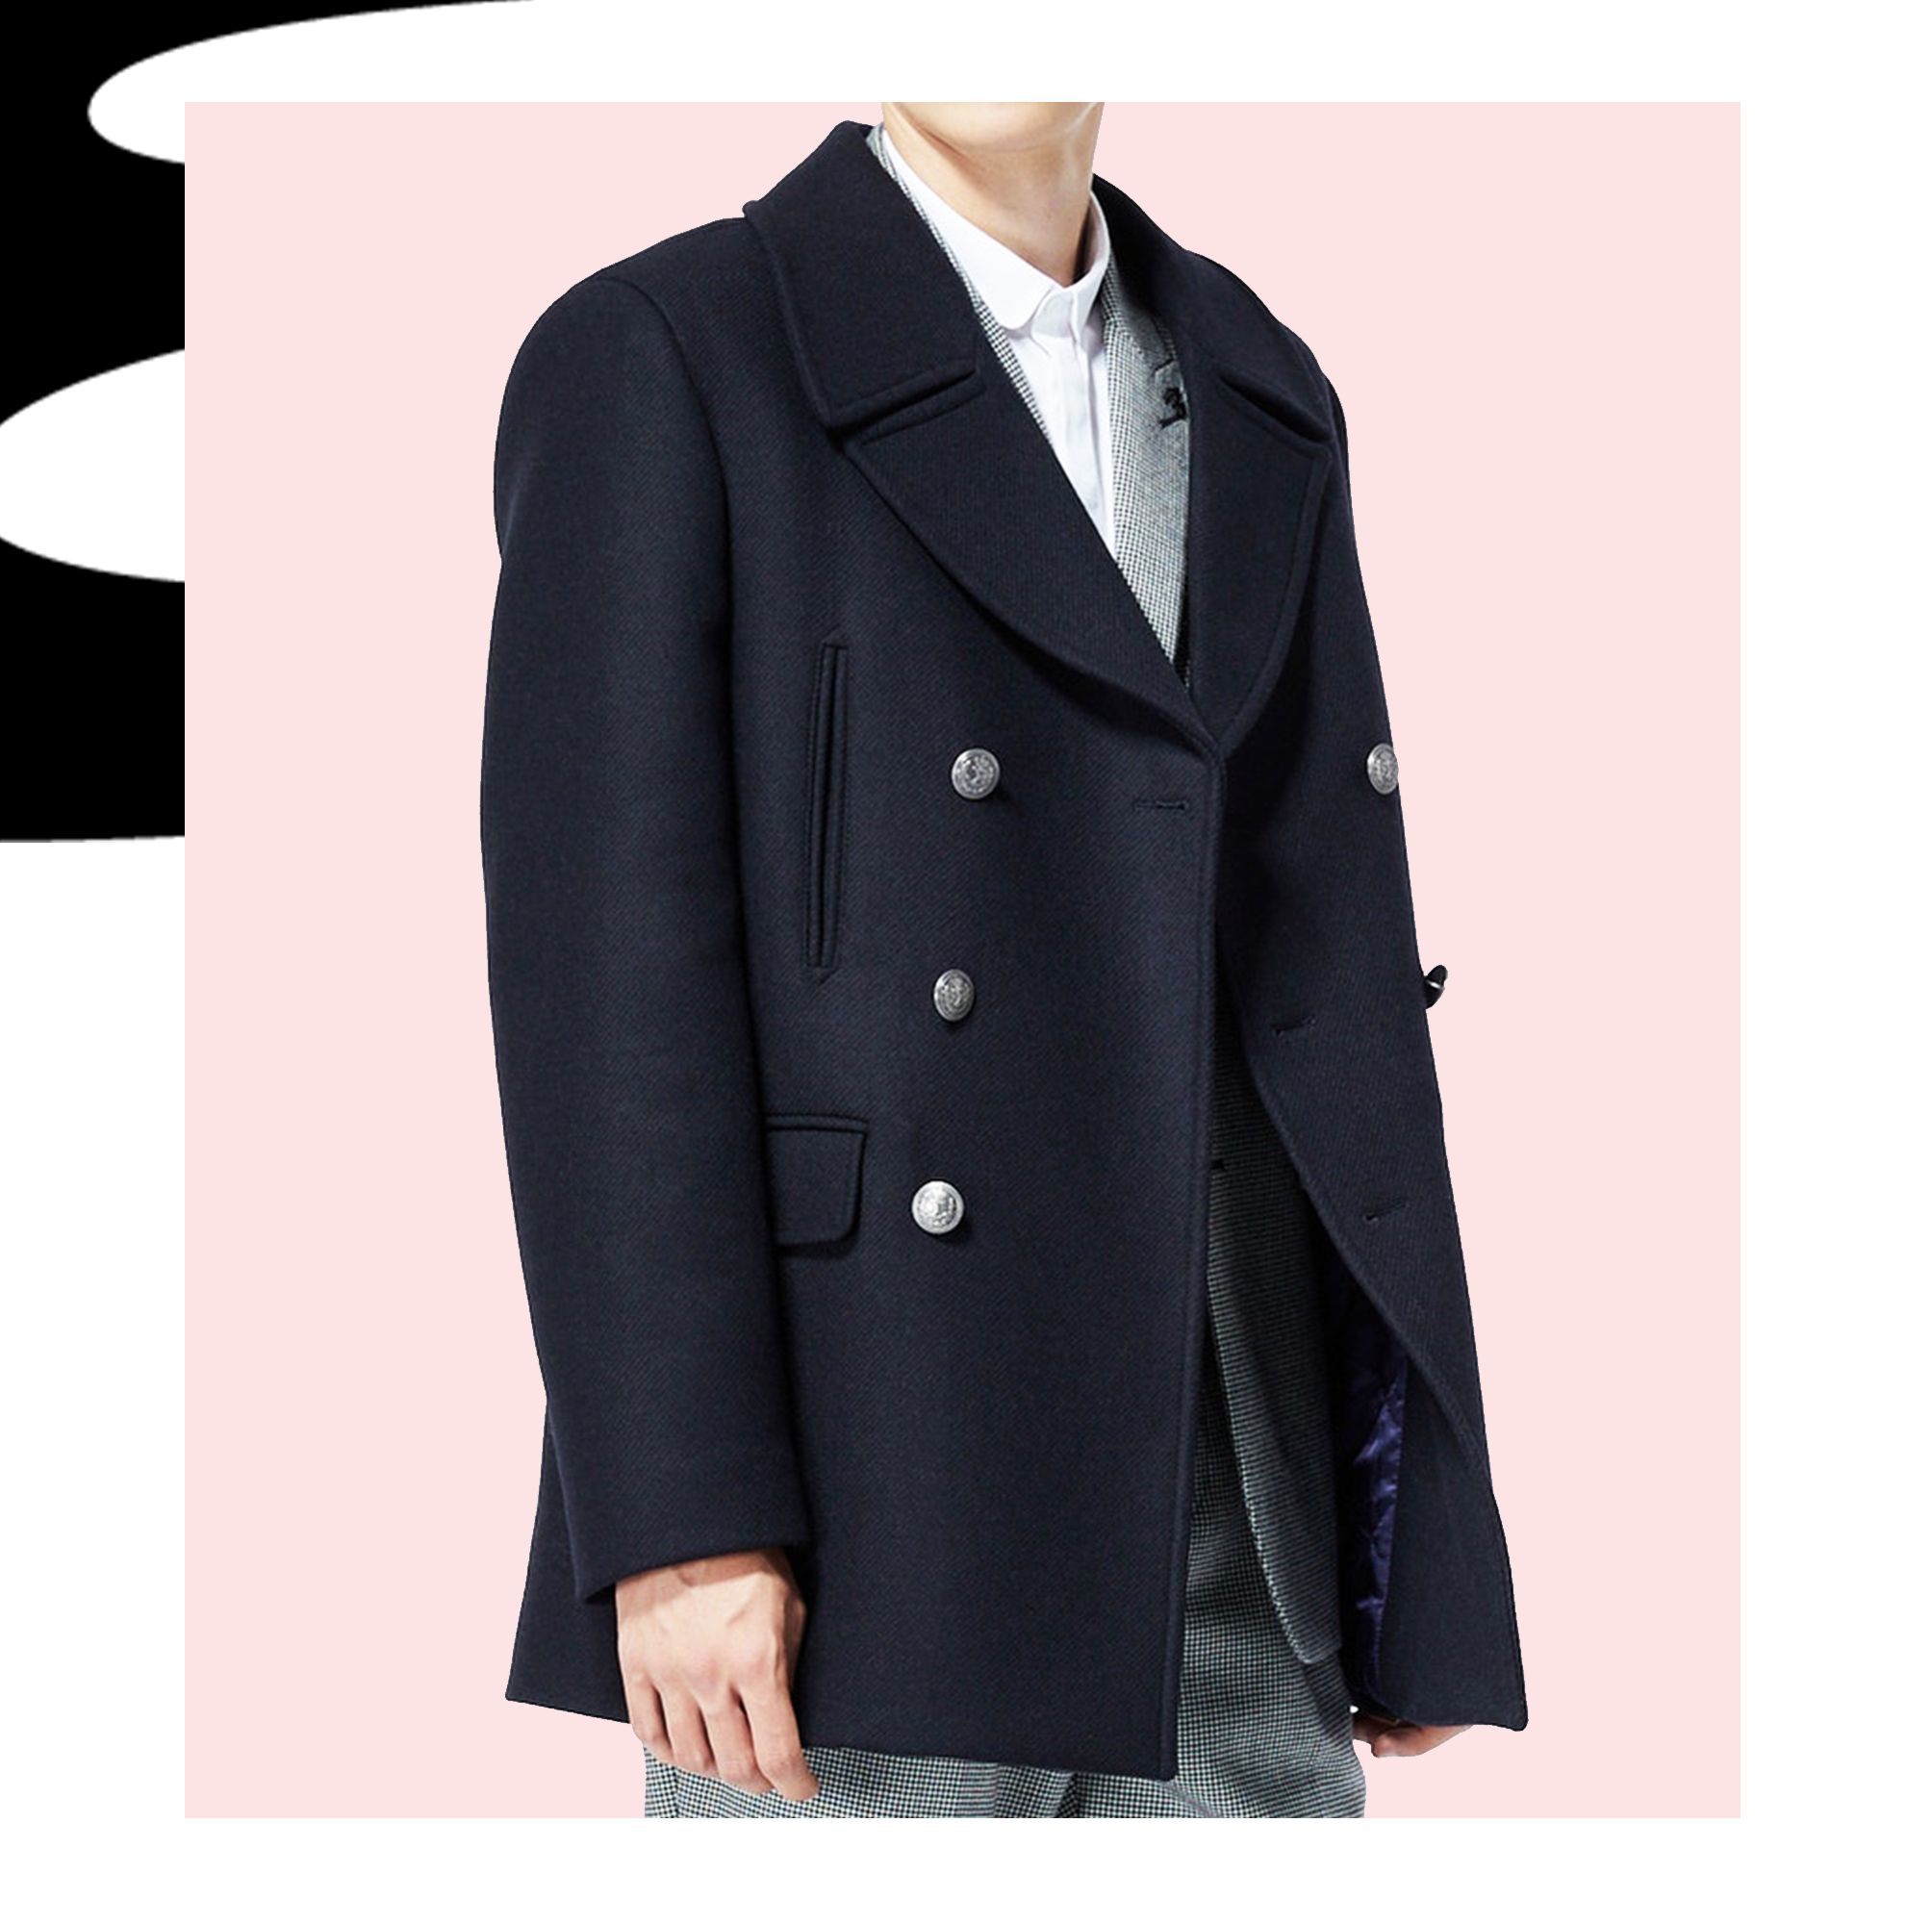 The Best Peacoats Will Make You Look Like the Leading Man of Your Own Movie